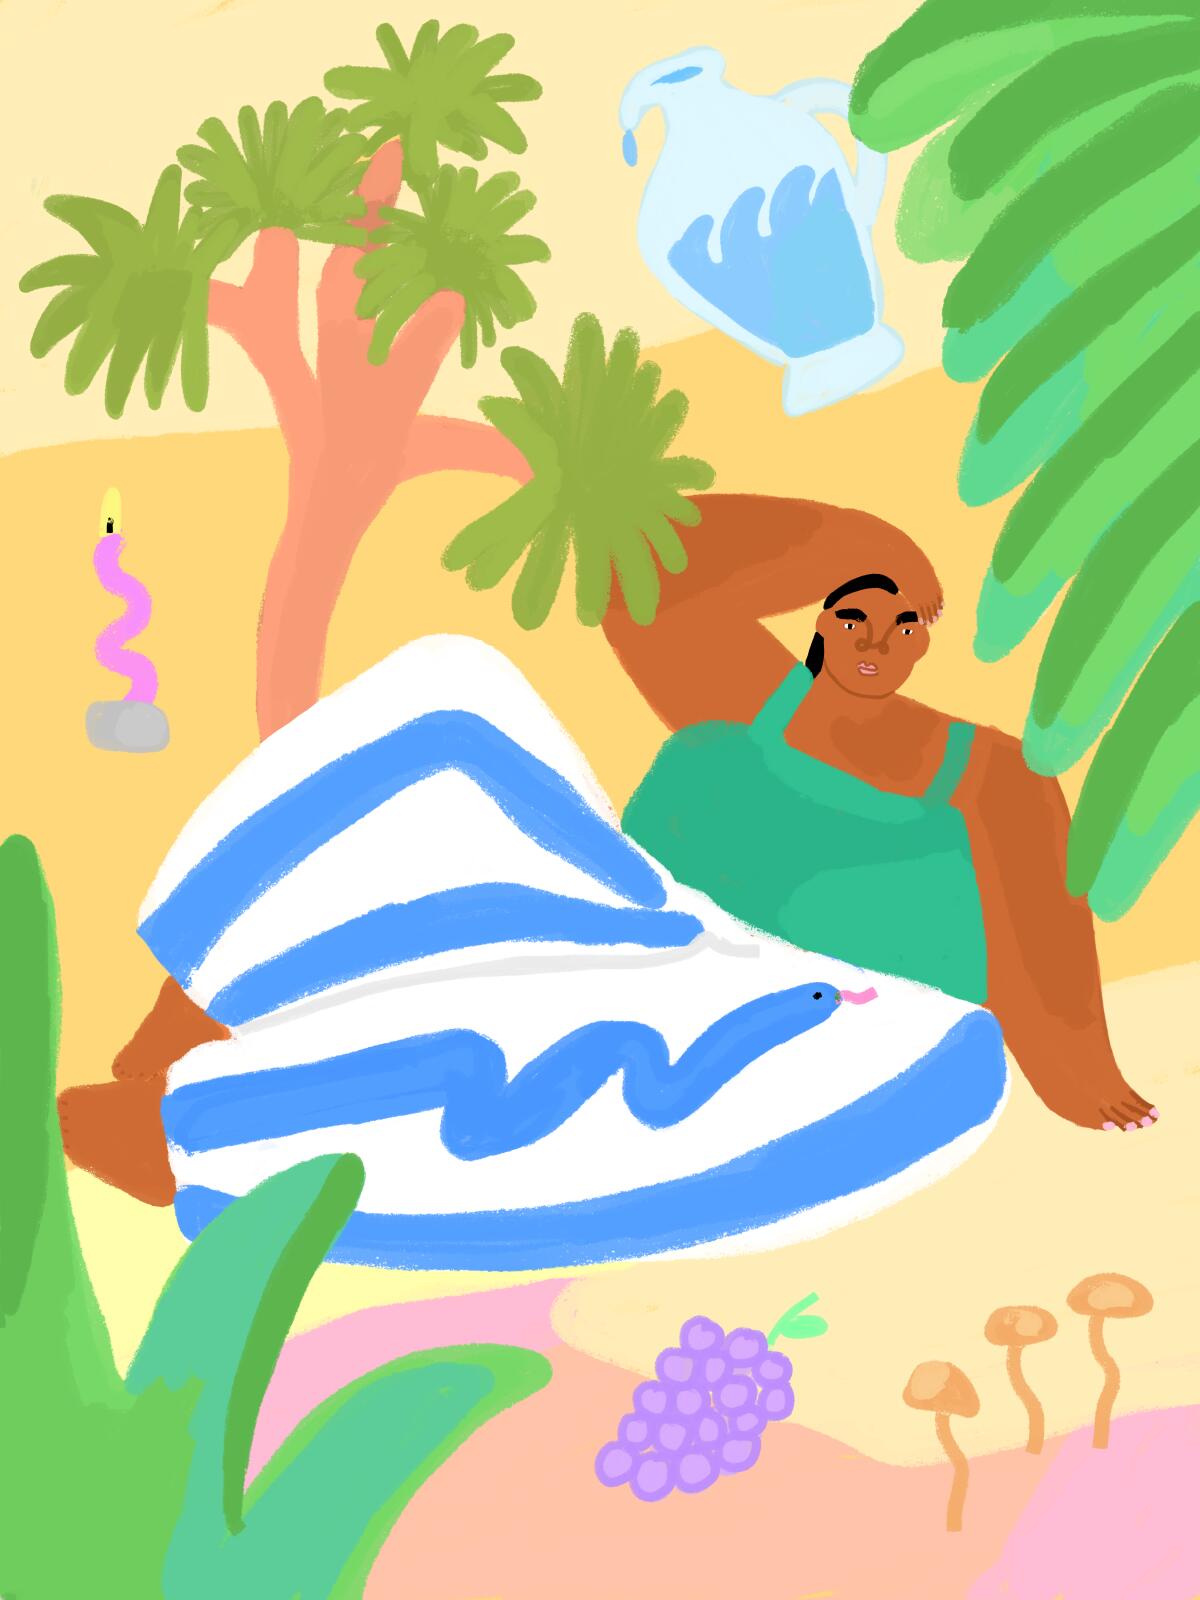 Illustration of a person in summery clothing sitting beneath a Joshua tree and alongside grapes and mushrooms.